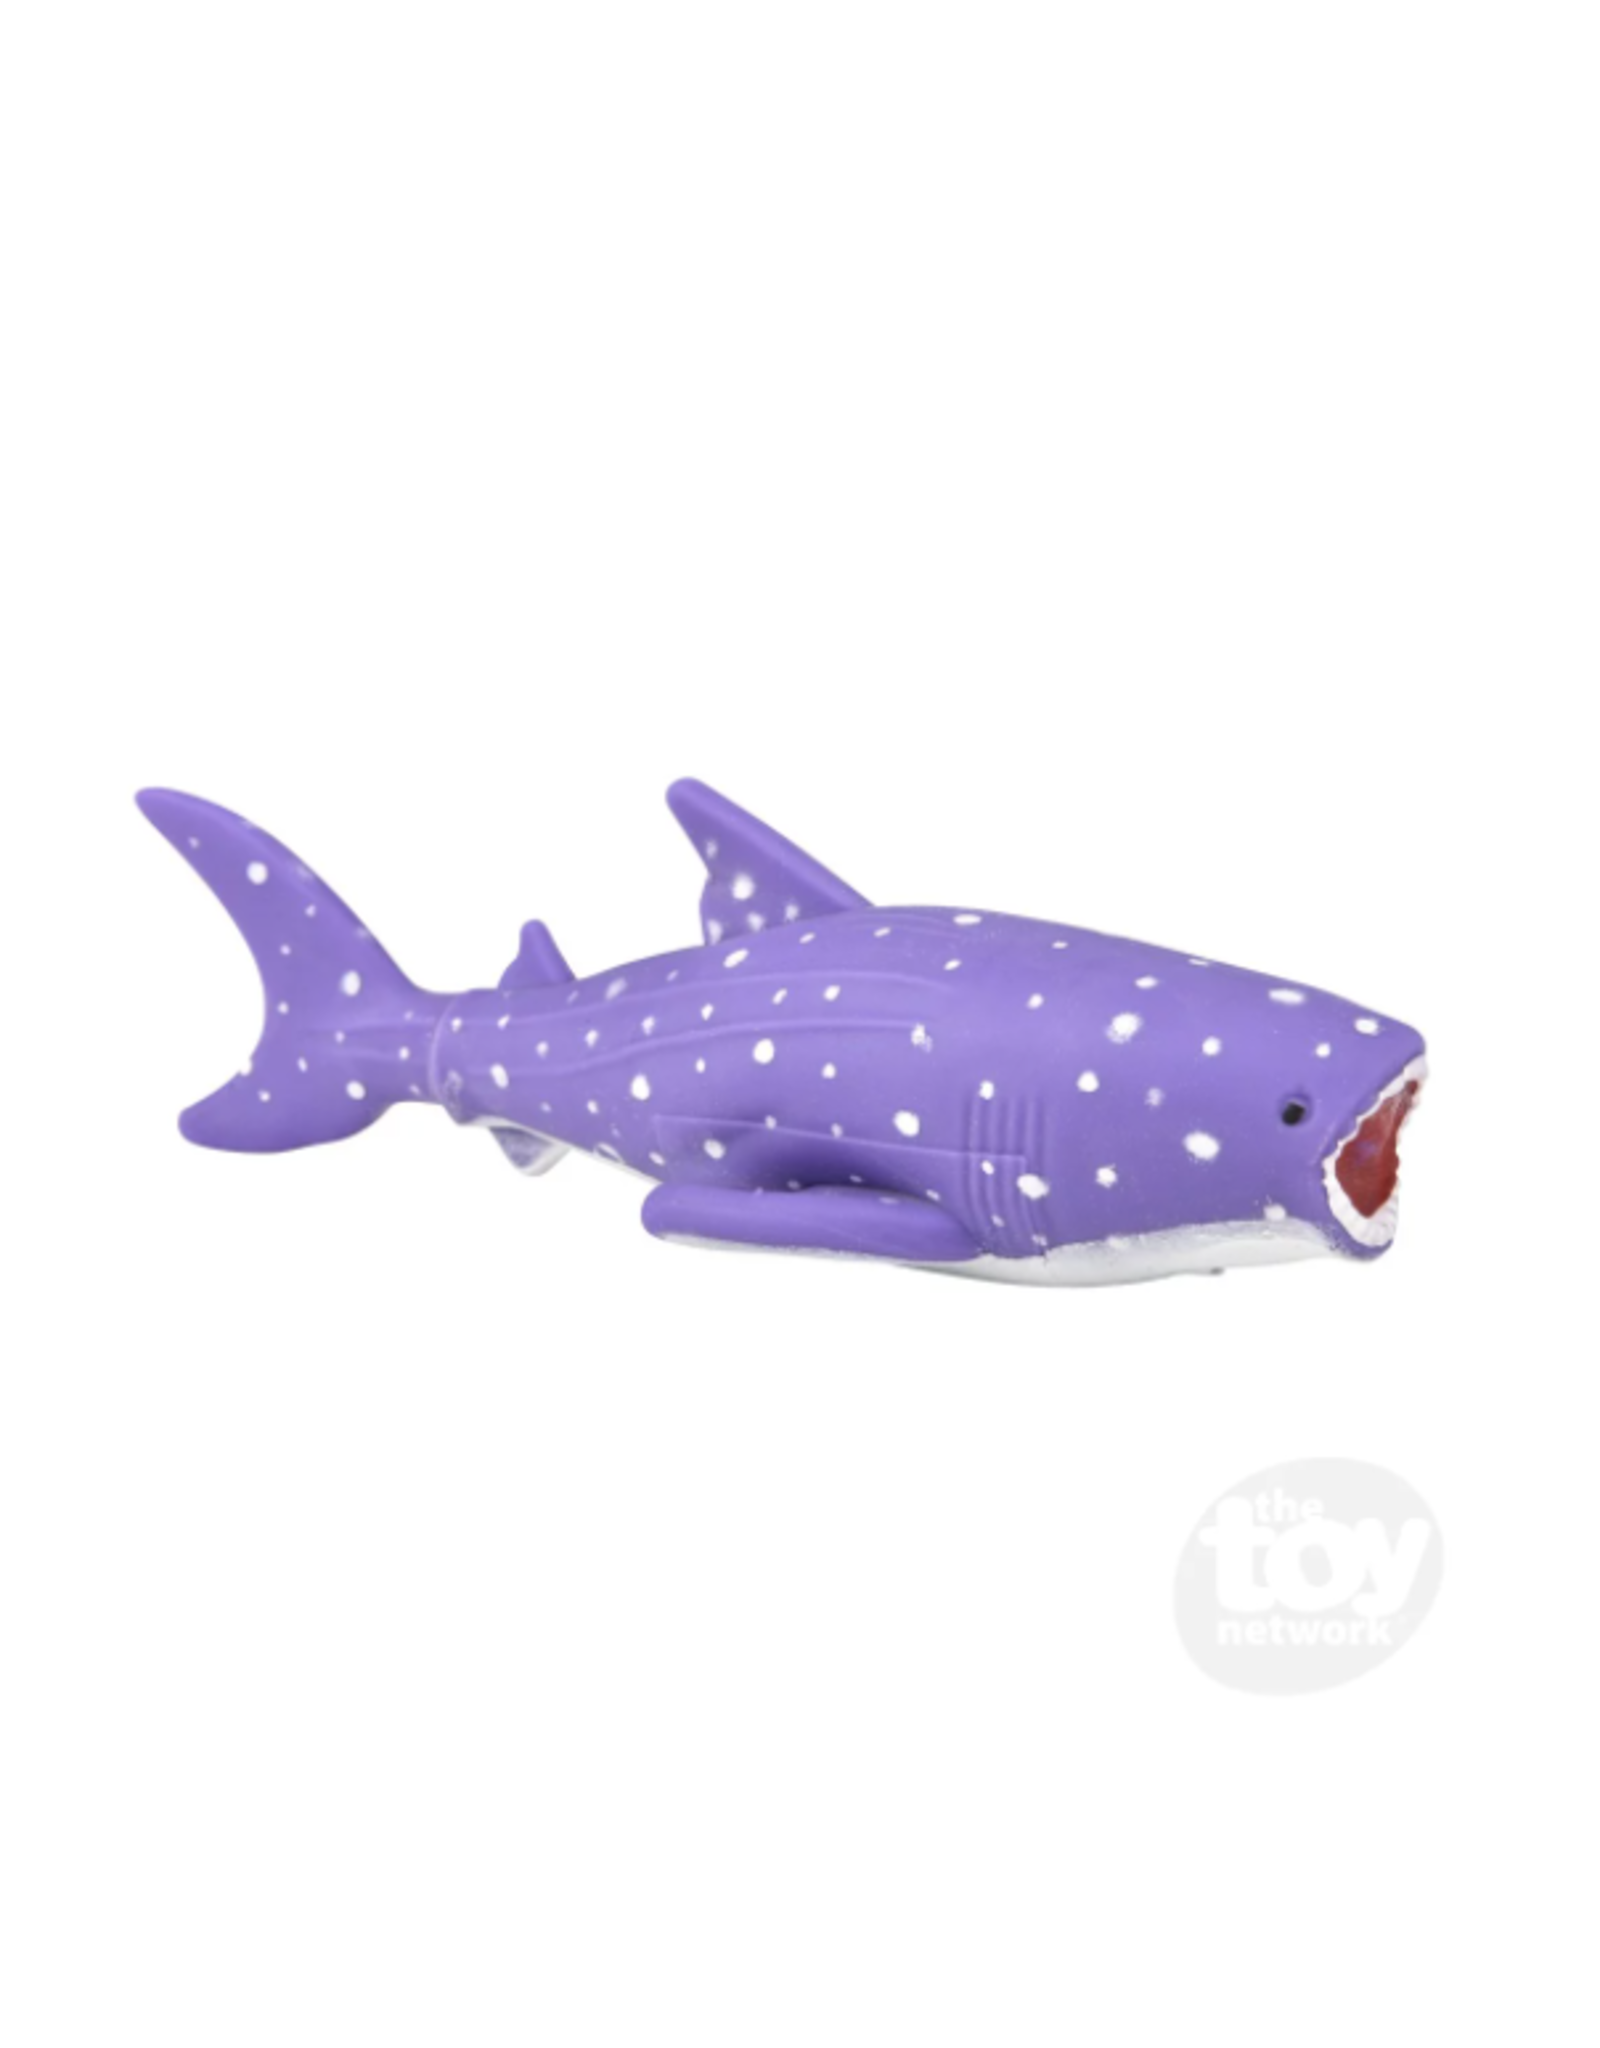 The Toy Network 7" Stretchy Sand Whale Shark